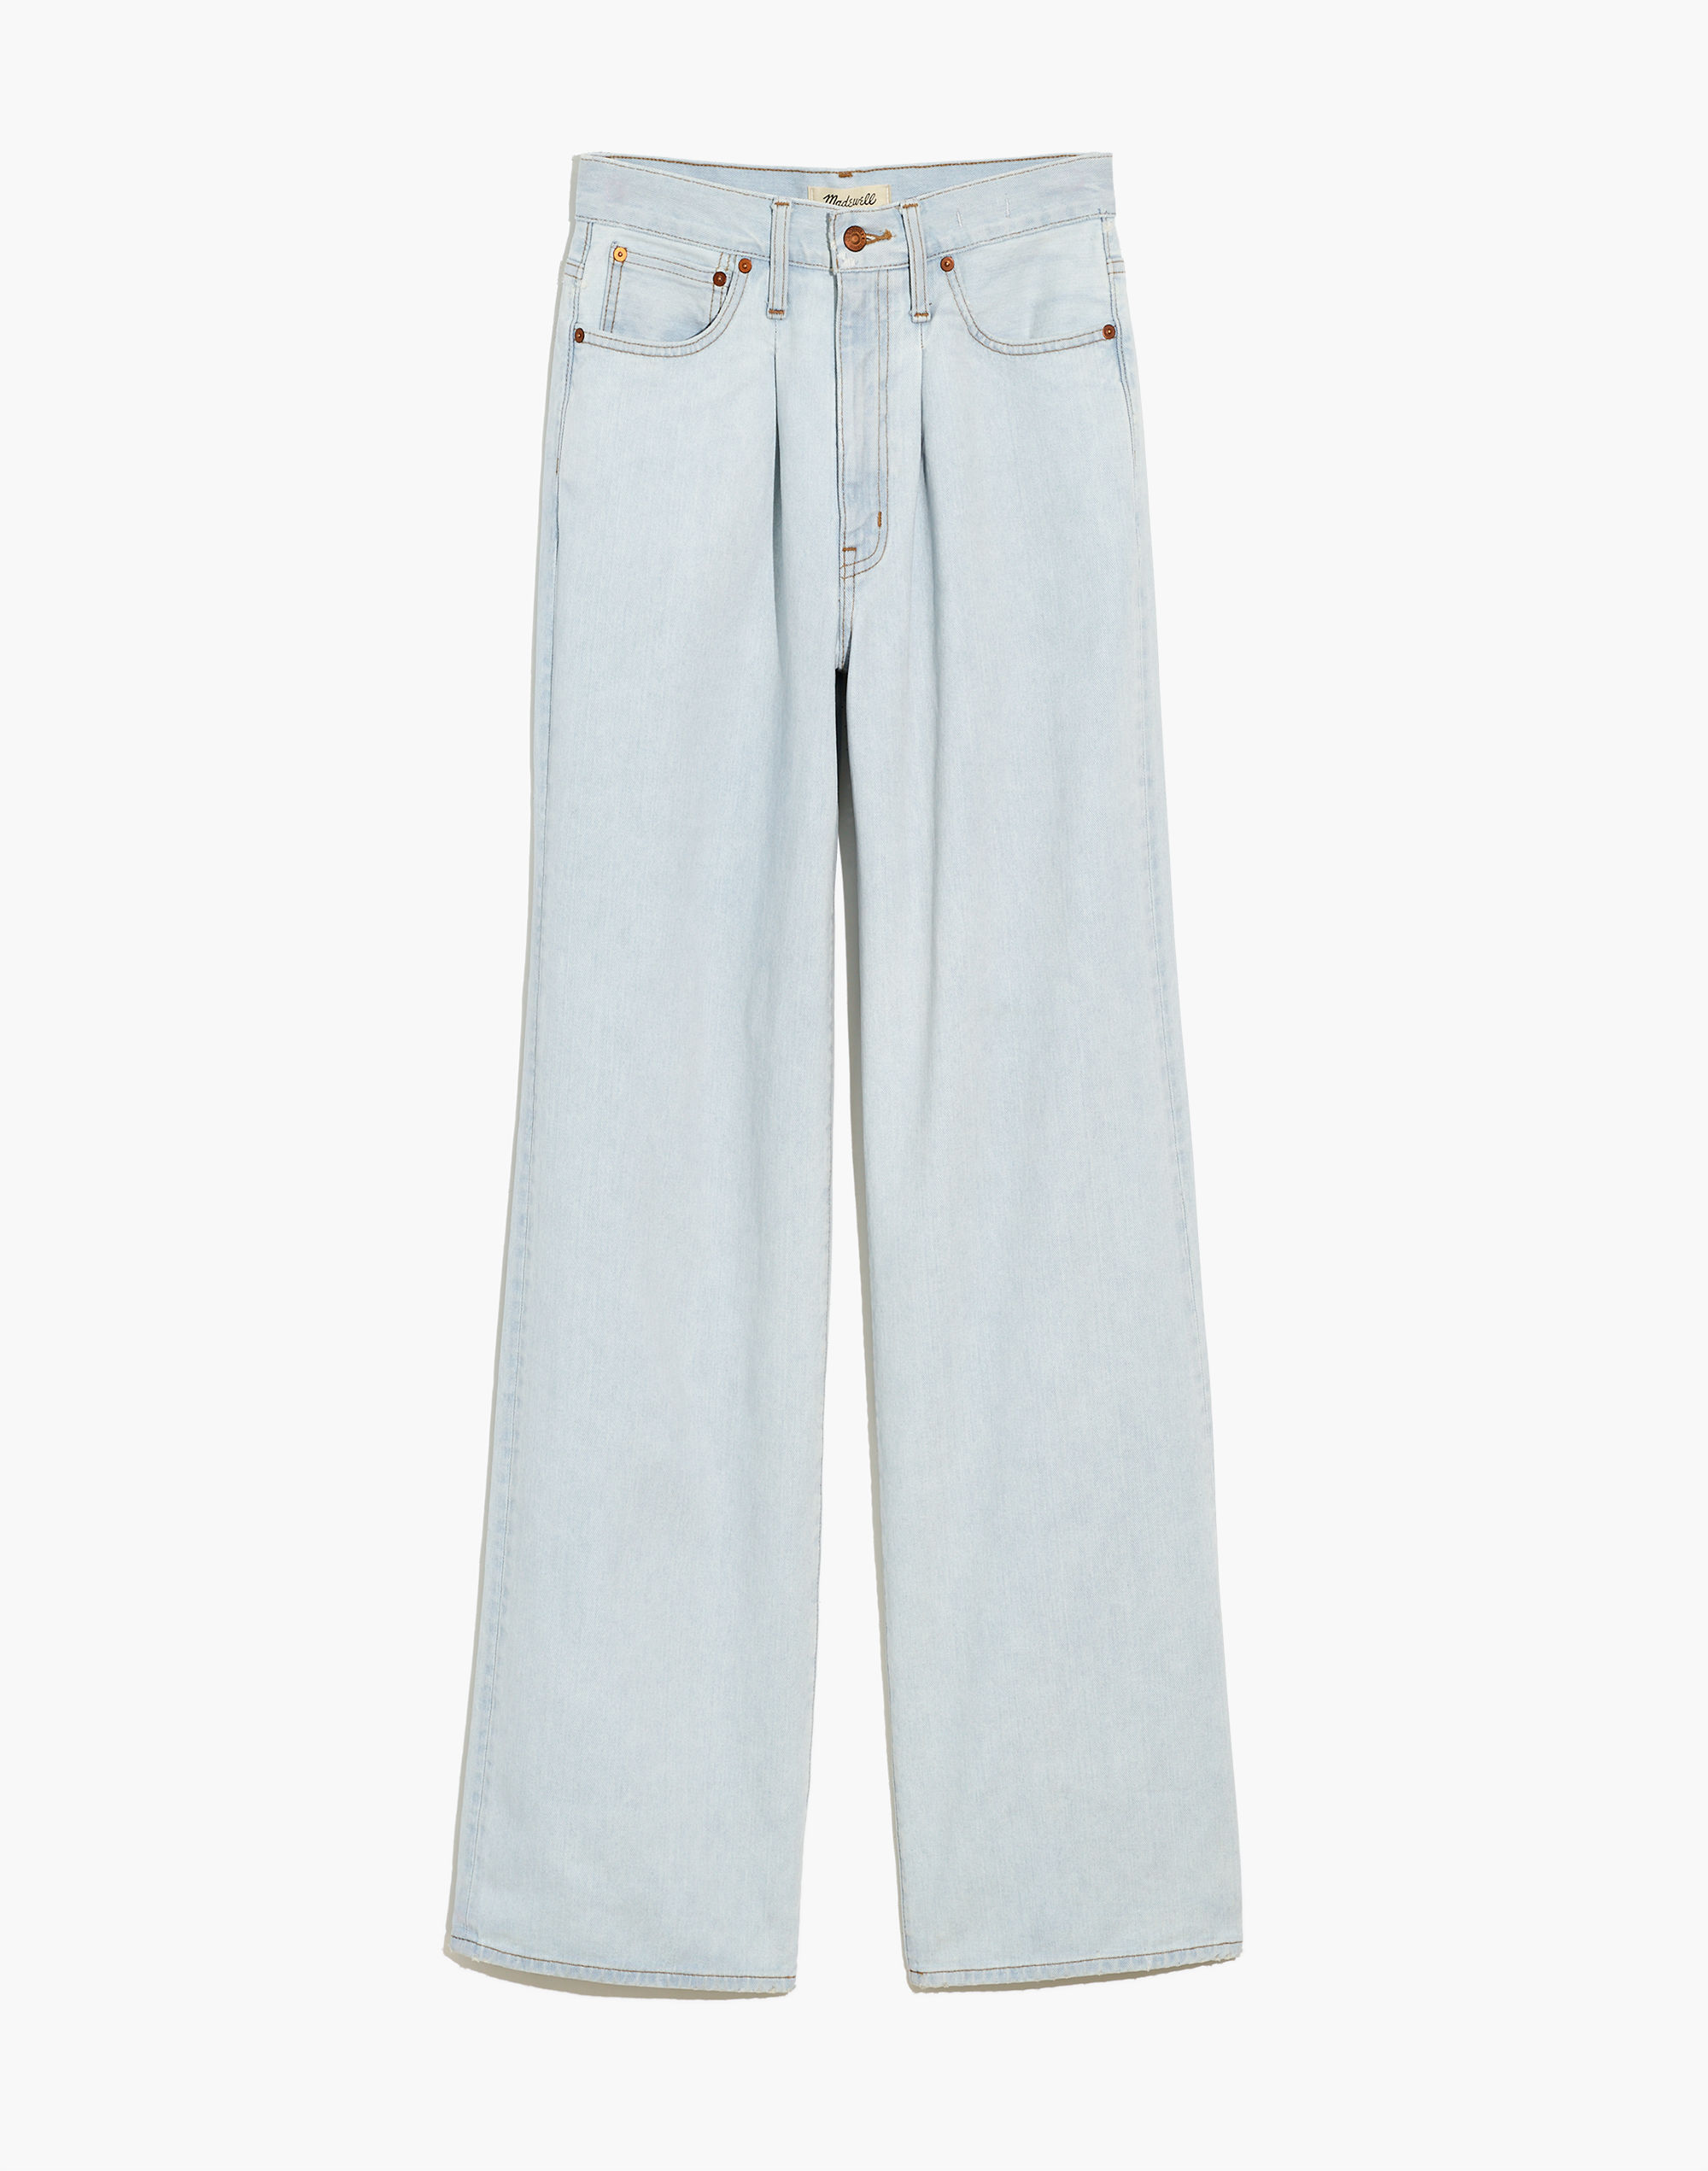 Superwide-Leg Jeans Olcott Wash: Pleated Edition